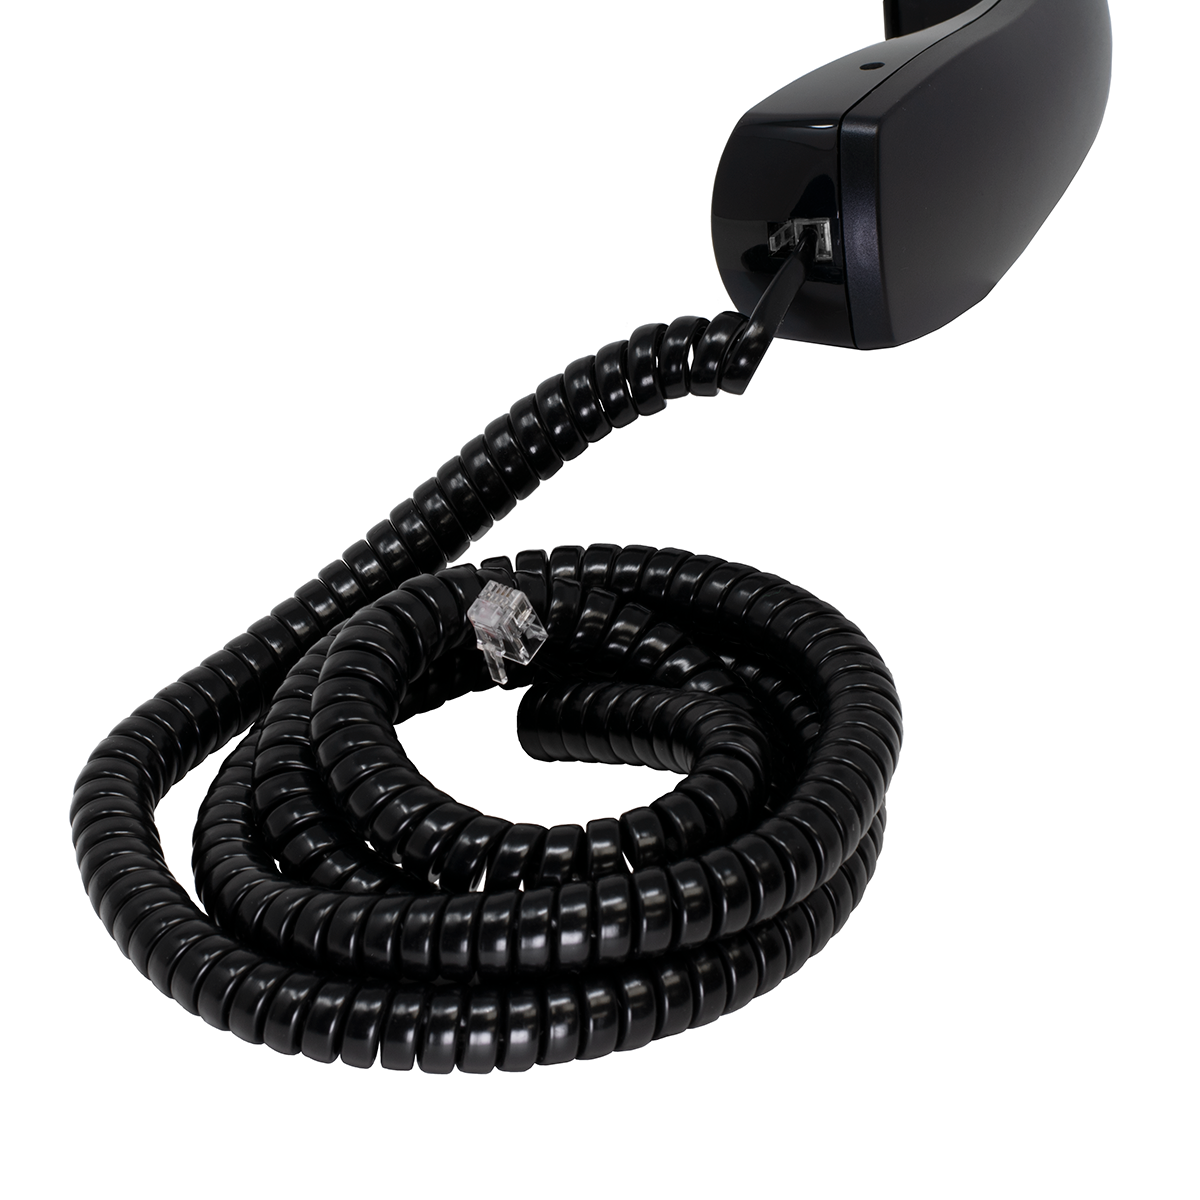 25' Black Coiled Handset Cord (Handset View)